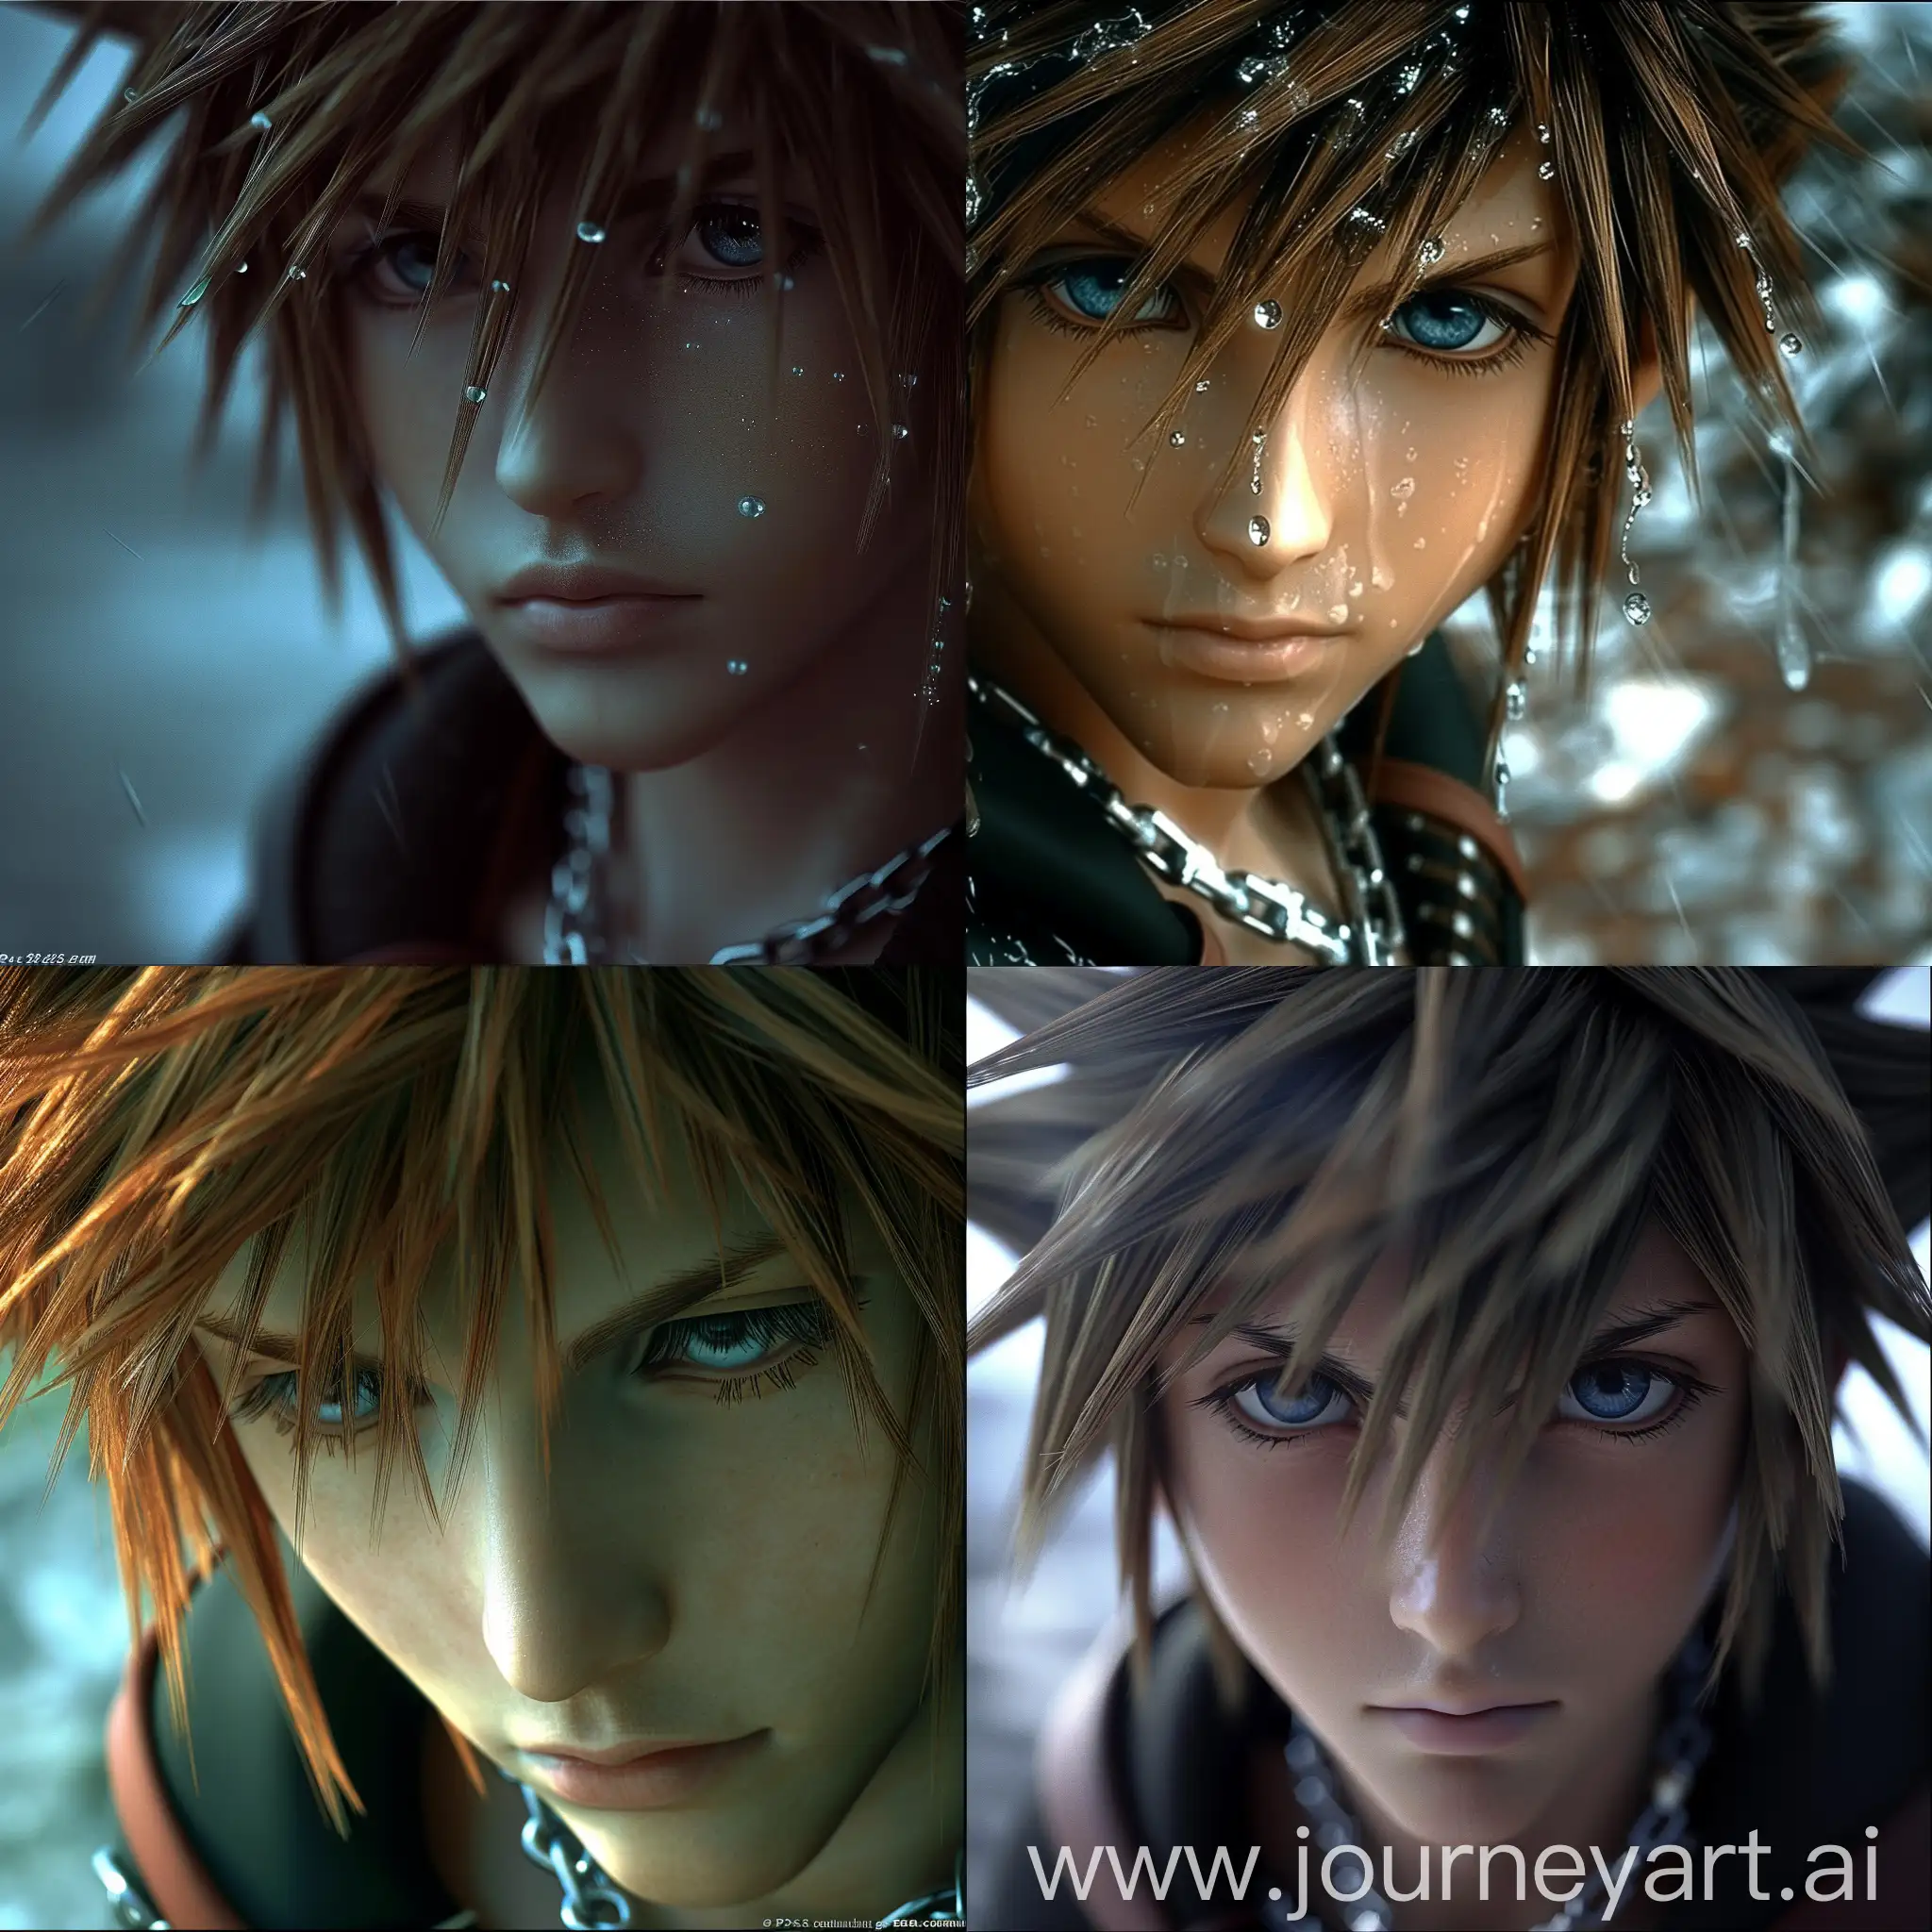 create a ps2 style, goth, close-up of Sora, ps2 playstation graphic, game gta, emo, goth, emo style